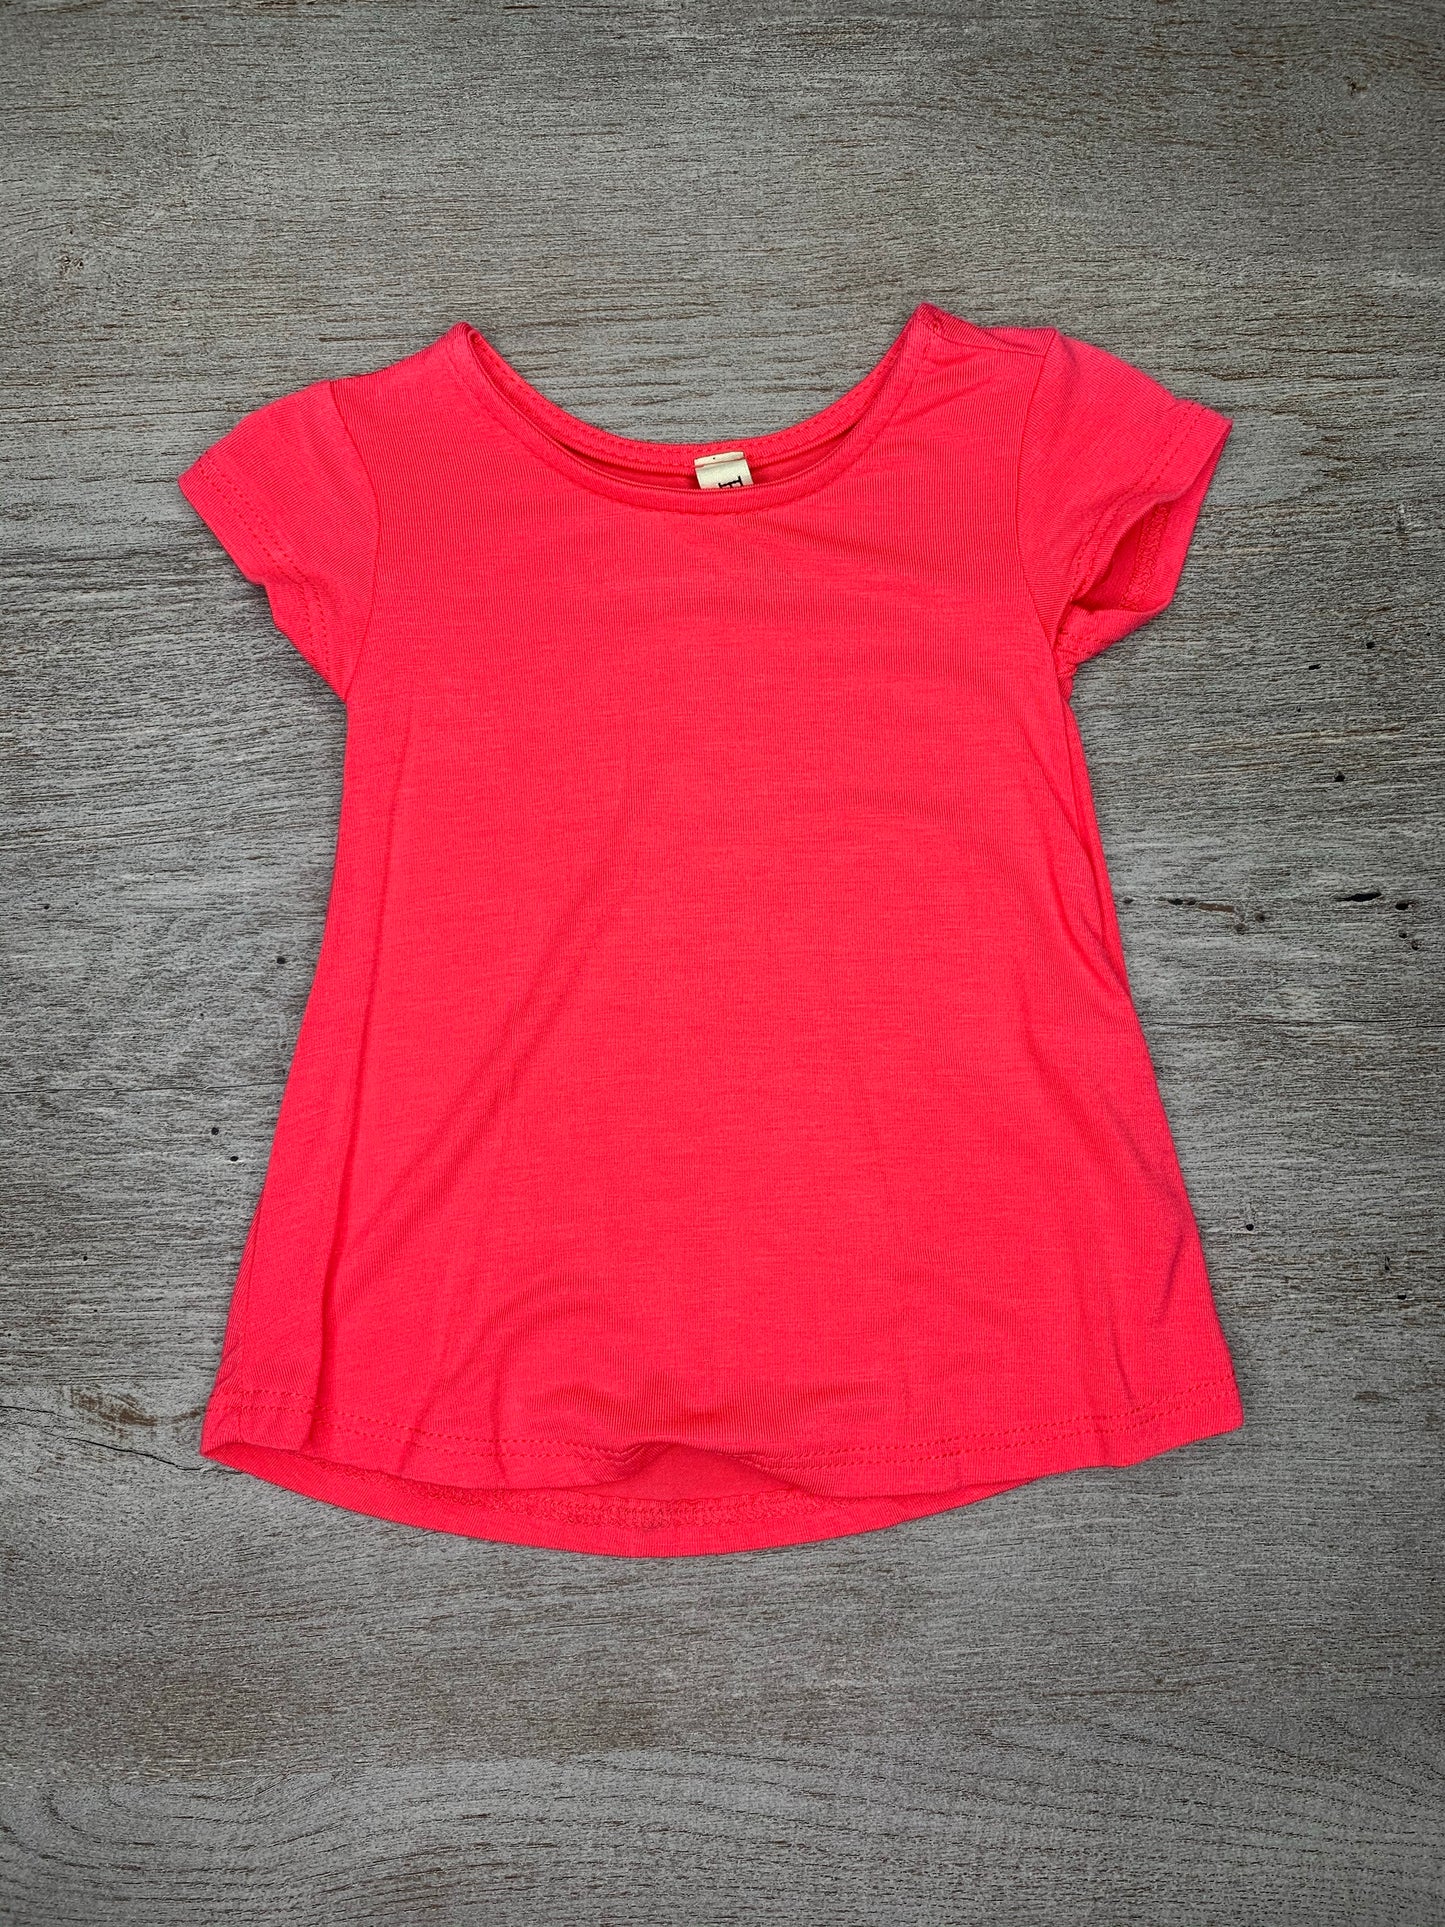 At Last My Love Tunic {Multiple Colors Available}